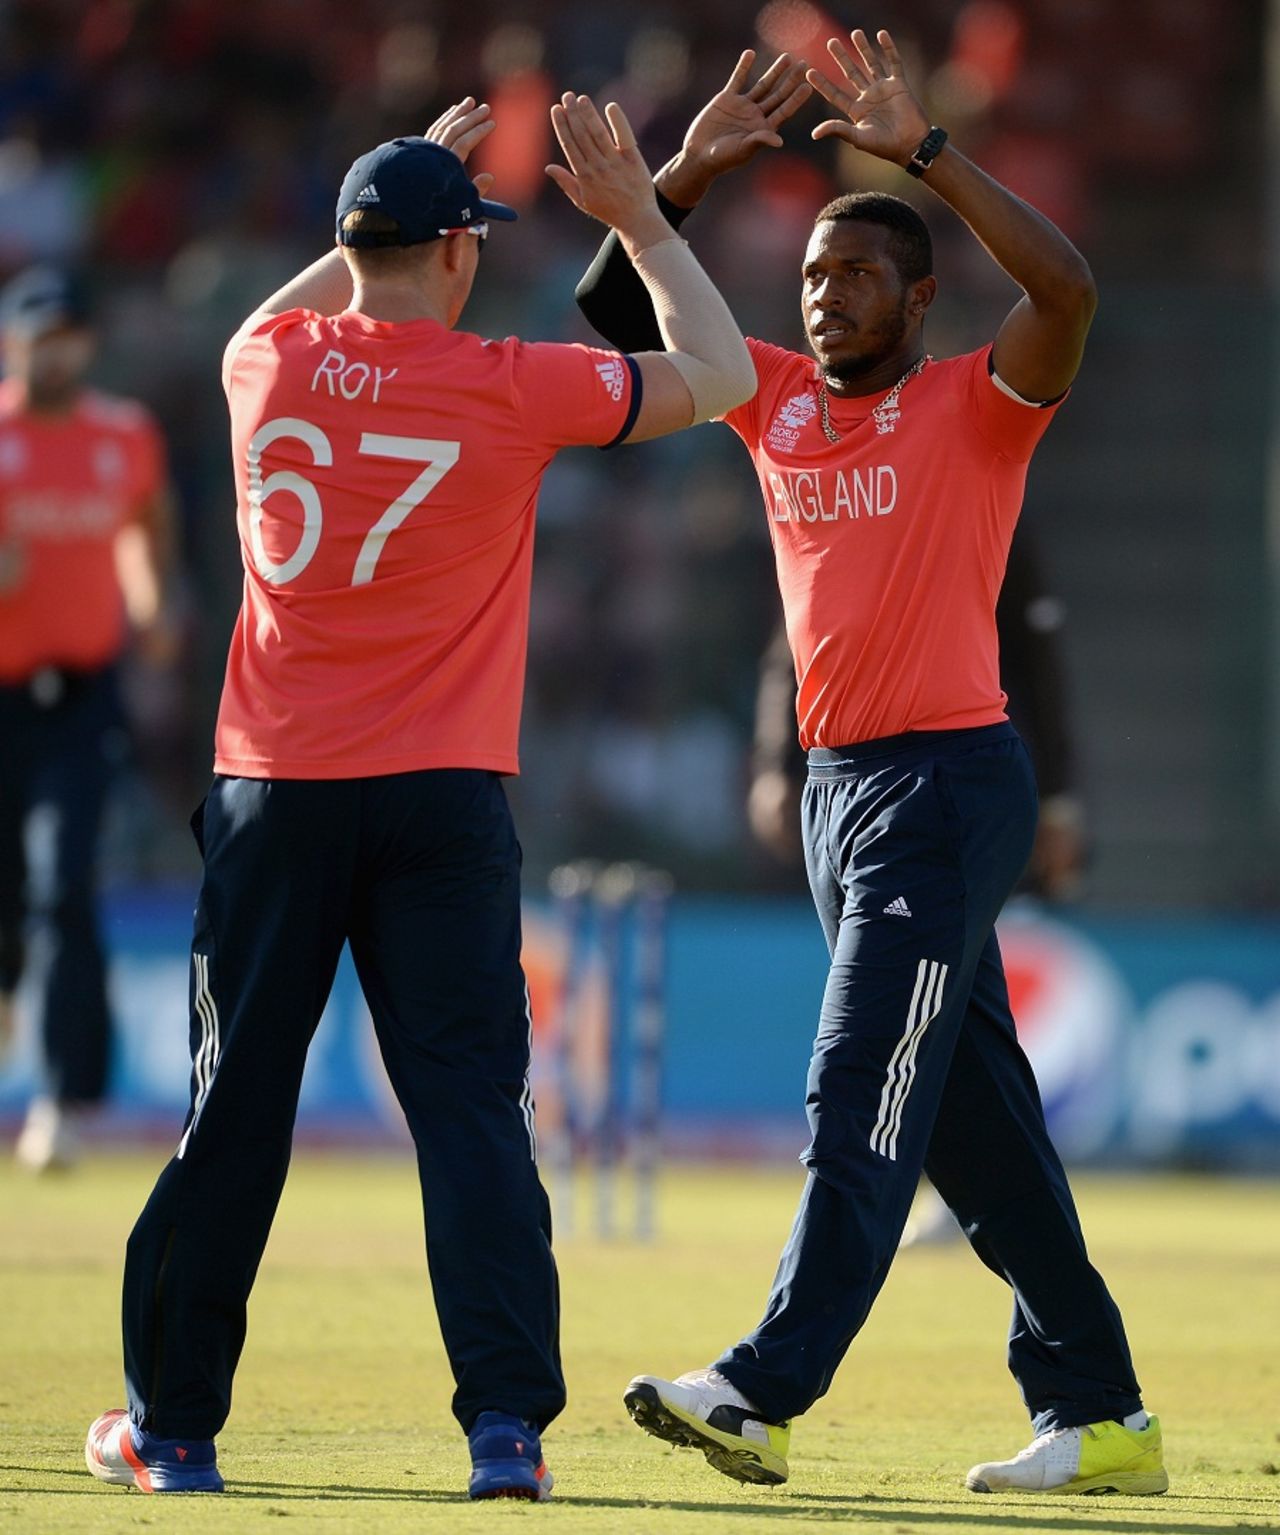 Chris Jordan celebrates the early wicket of Asghar Stanikzai, Afghanistan v England, World T20 2016, Group 1, Delhi, March 23, 2016